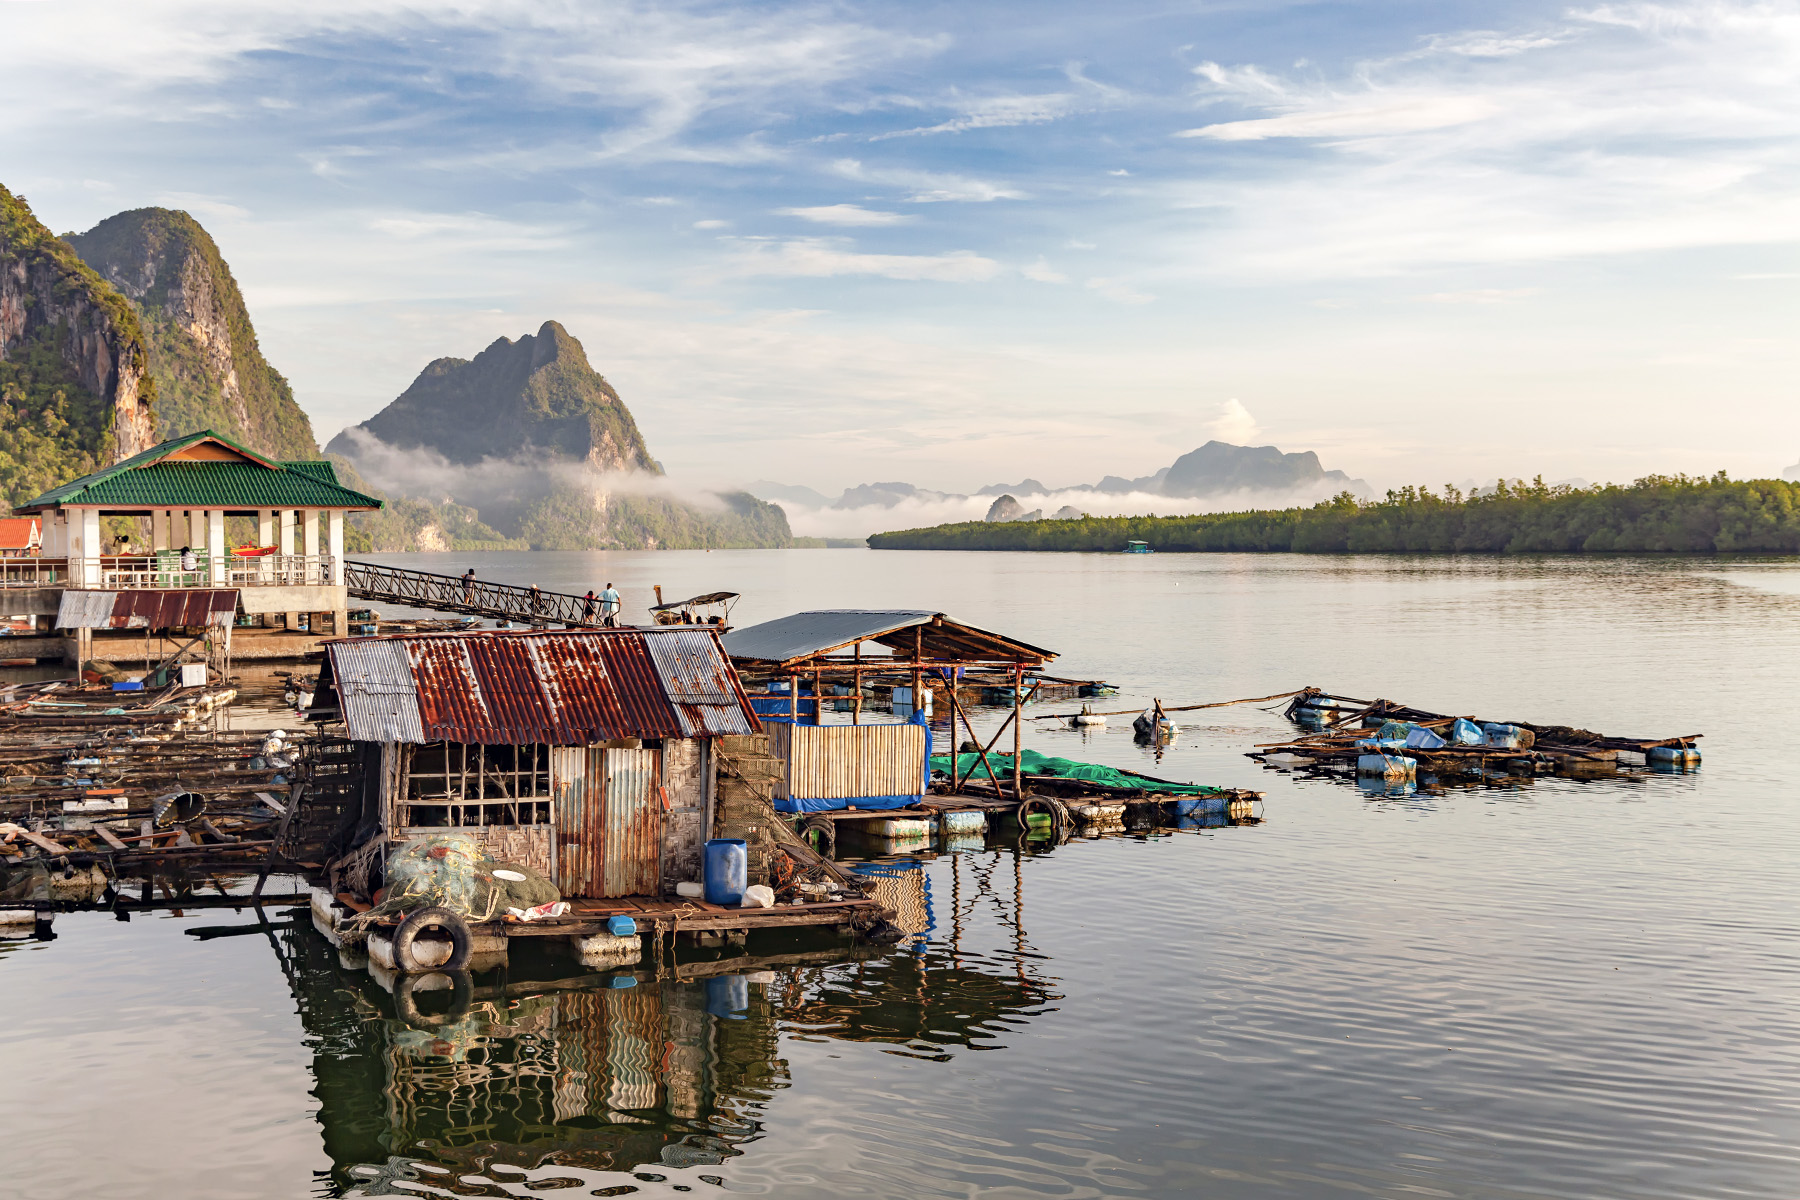 Fishing village of Phang-nga, Thailand, bordering the Andaman Sea on the west coast of the Malay Peninsula. Houses are surrounded by water, but seem to be safe for now.